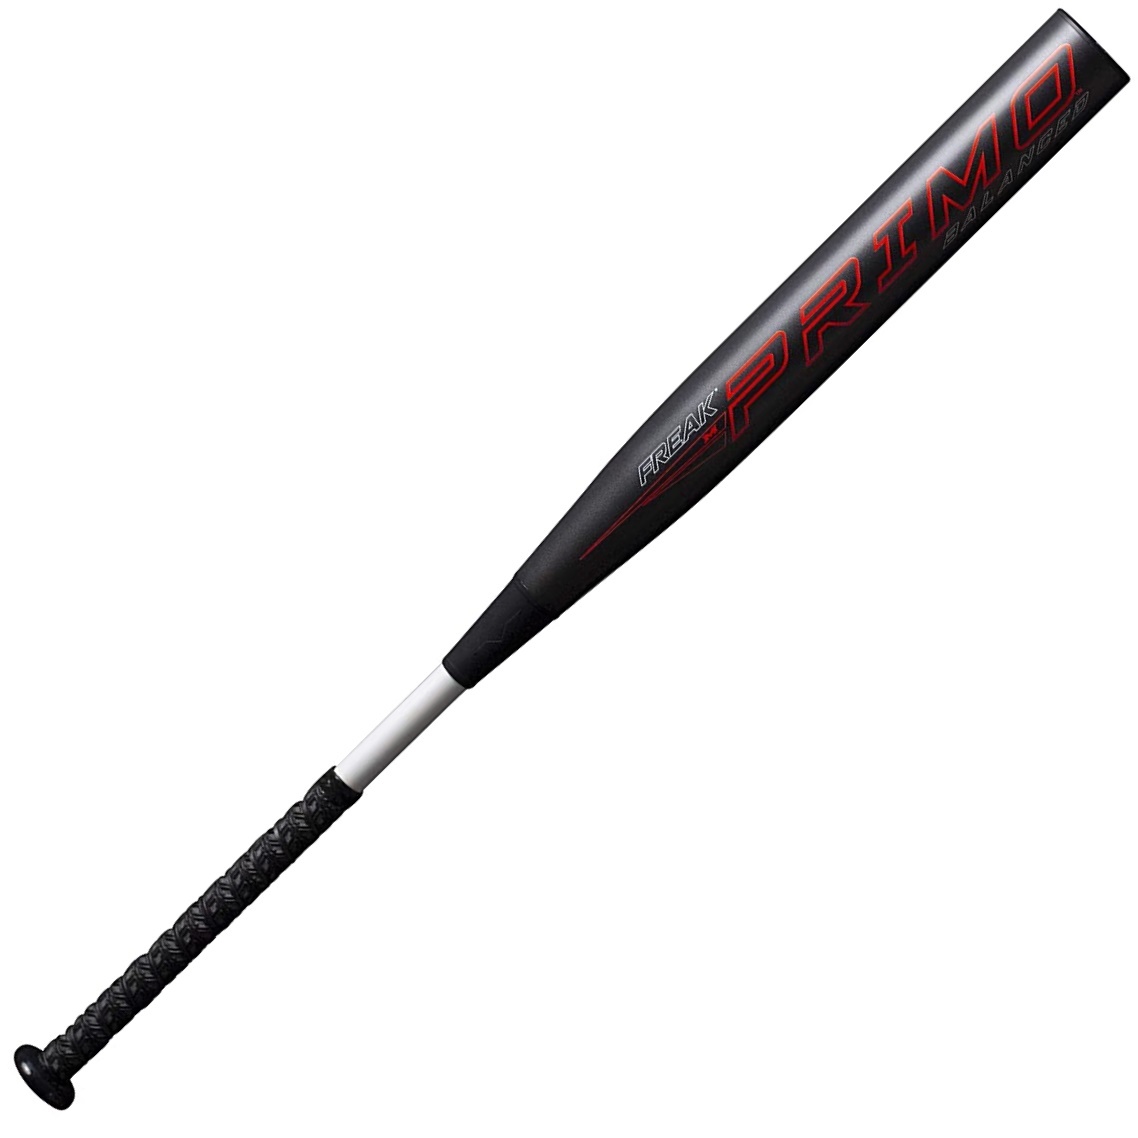 The 2021 Freak Primo balanced USA bat offers a superior feel and unmatched pop. It features our breakthrough Tetra-Core technology which increases compression for greater responsiveness off the barrel. As a result, you'll feel the ball jump off the barrel every swing. In addition, it combines a balanced end load with our sensi-flex handle to provide the perfect flex to generate optimal swing speed through the zone. This Freak Primo bat is sure to help you dominate your USA leagues from the moment you pick it up. Order now! Made in the U.S.A.  Size:   2 1/4 in  Certification:   USA  End:   Balanced  Frame:   Four-Piece  Handle:   Sensi-Flex  Technology:   Tetra-Core Technology  Series:   Primo  Warranty:   1 Year  Barrel Length:   14 in  Year Released:   2021 